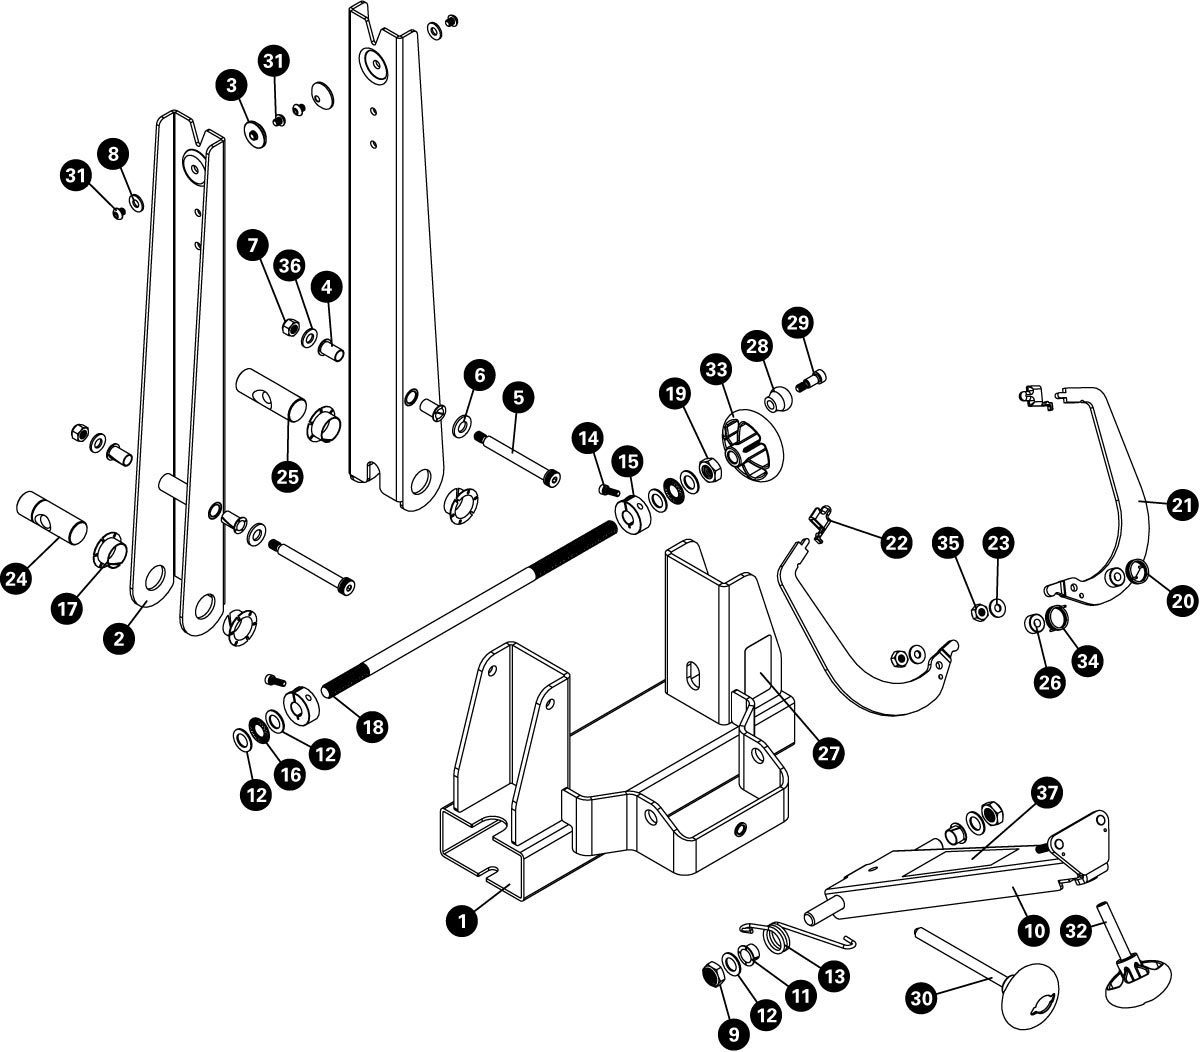 Parts diagram for TS-4.2 Professional Wheel Truing Stand, click to enlarge